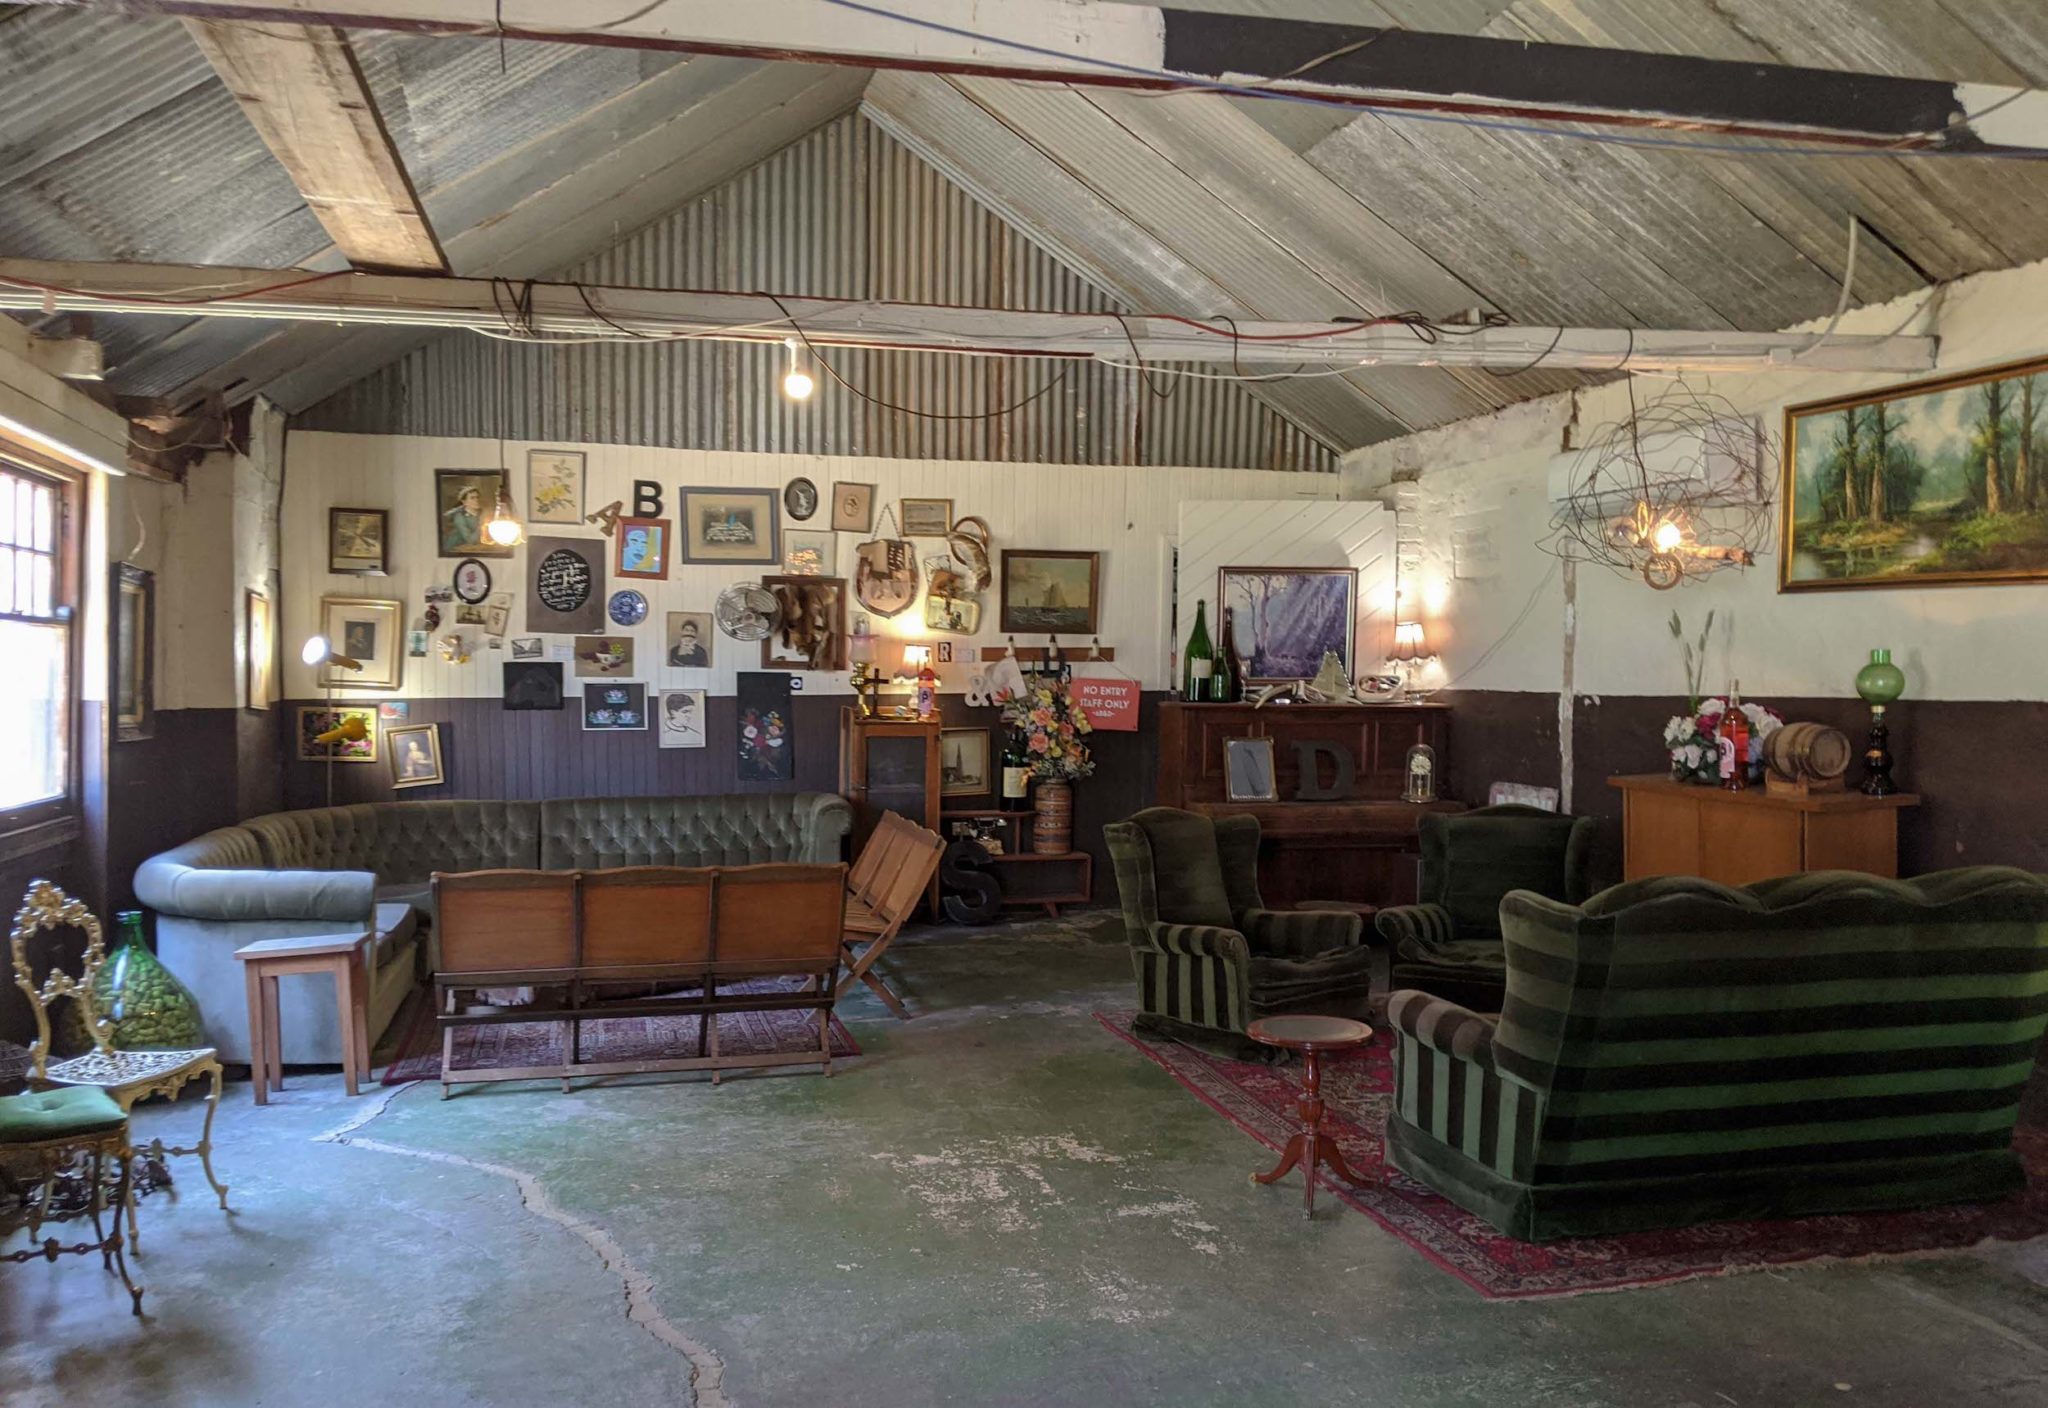 Antique furniture and crowded artwork and frames inside the cellar door